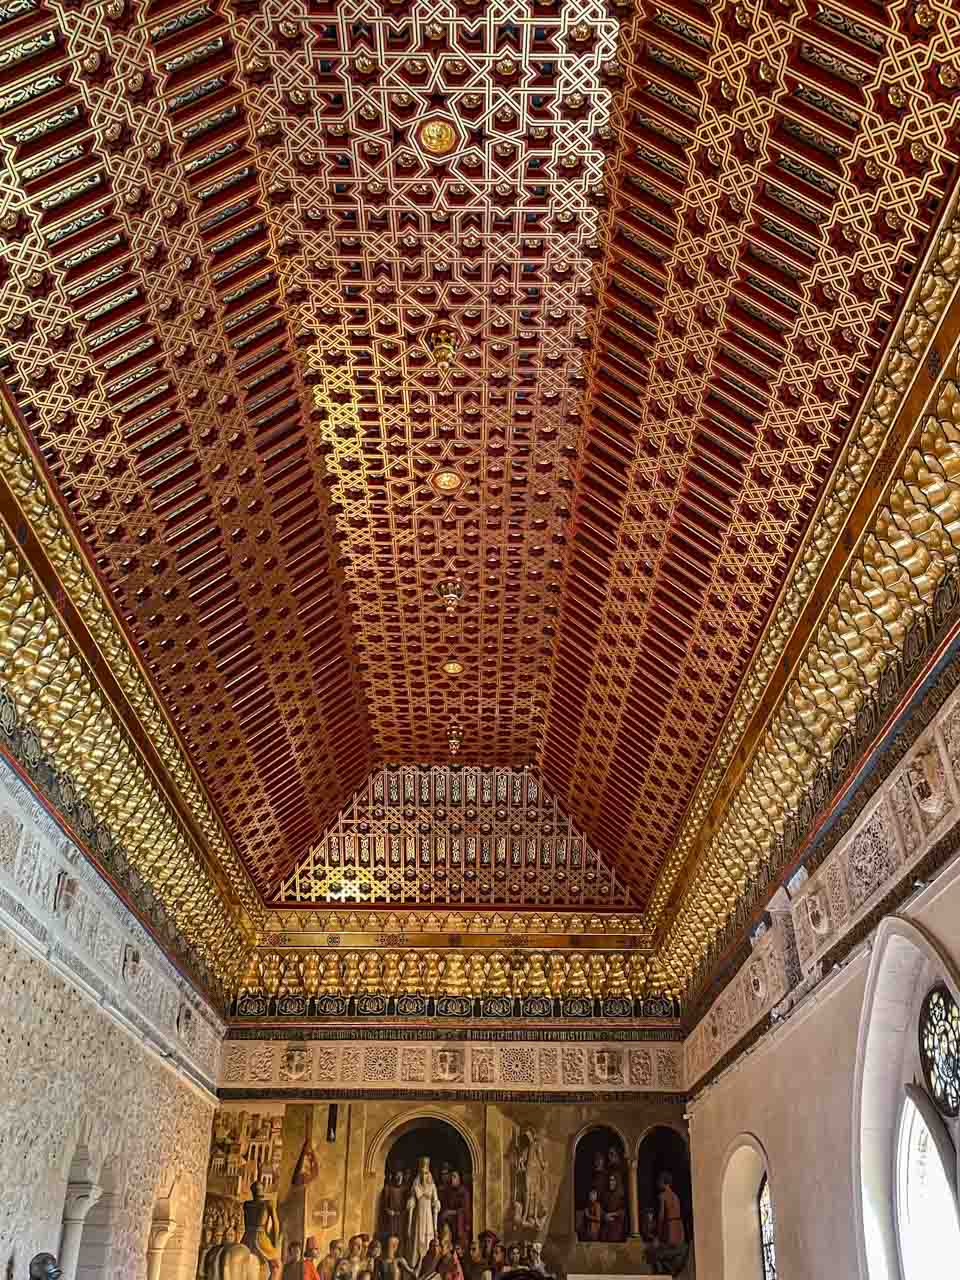 A room with an ornately decorated wooden ceiling.